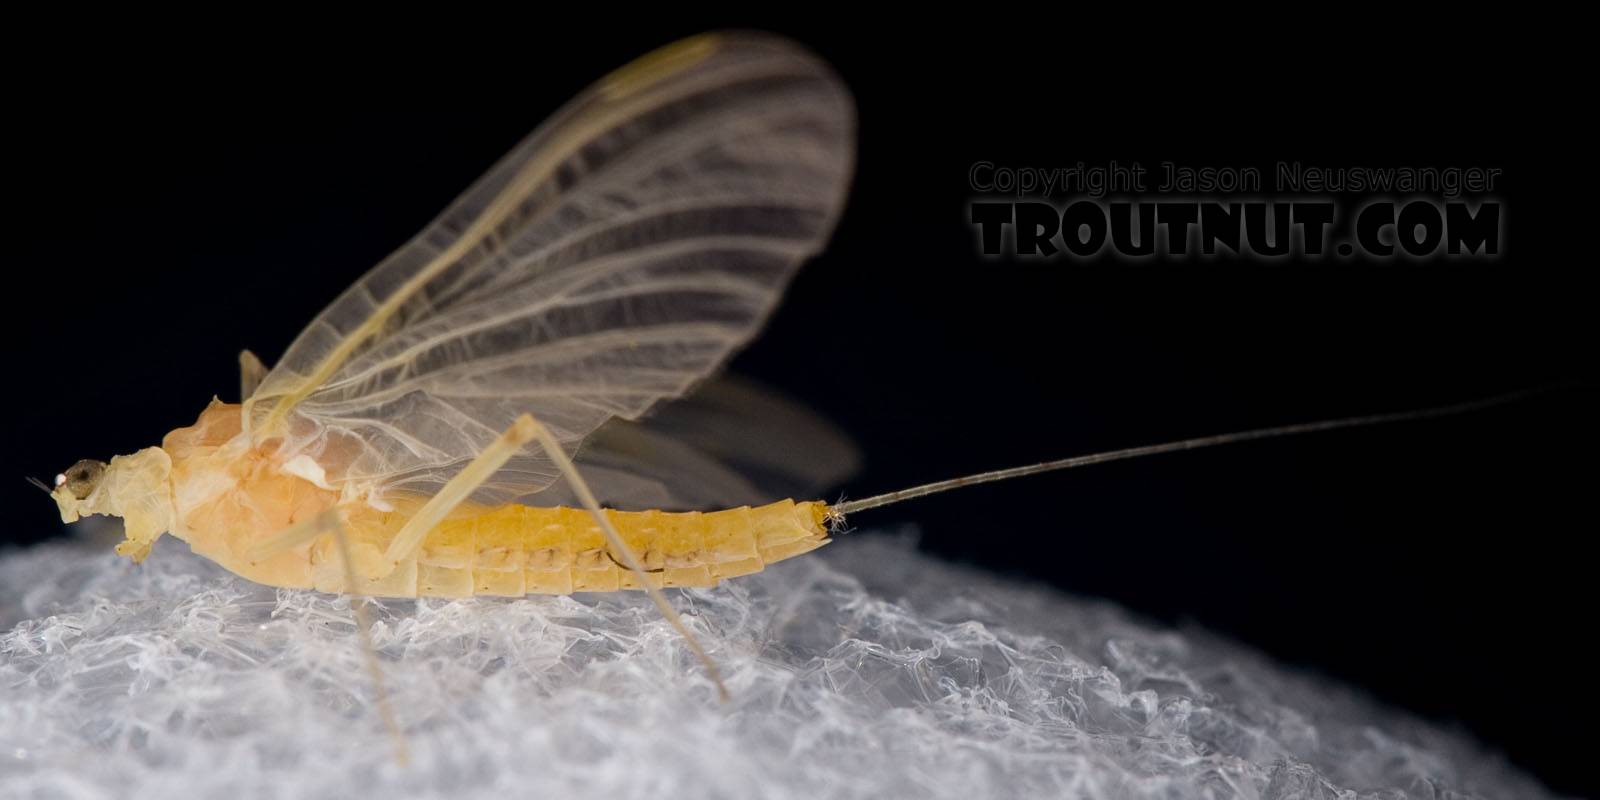 Female Penelomax septentrionalis Mayfly Dun from the West Branch of the Delaware River in New York